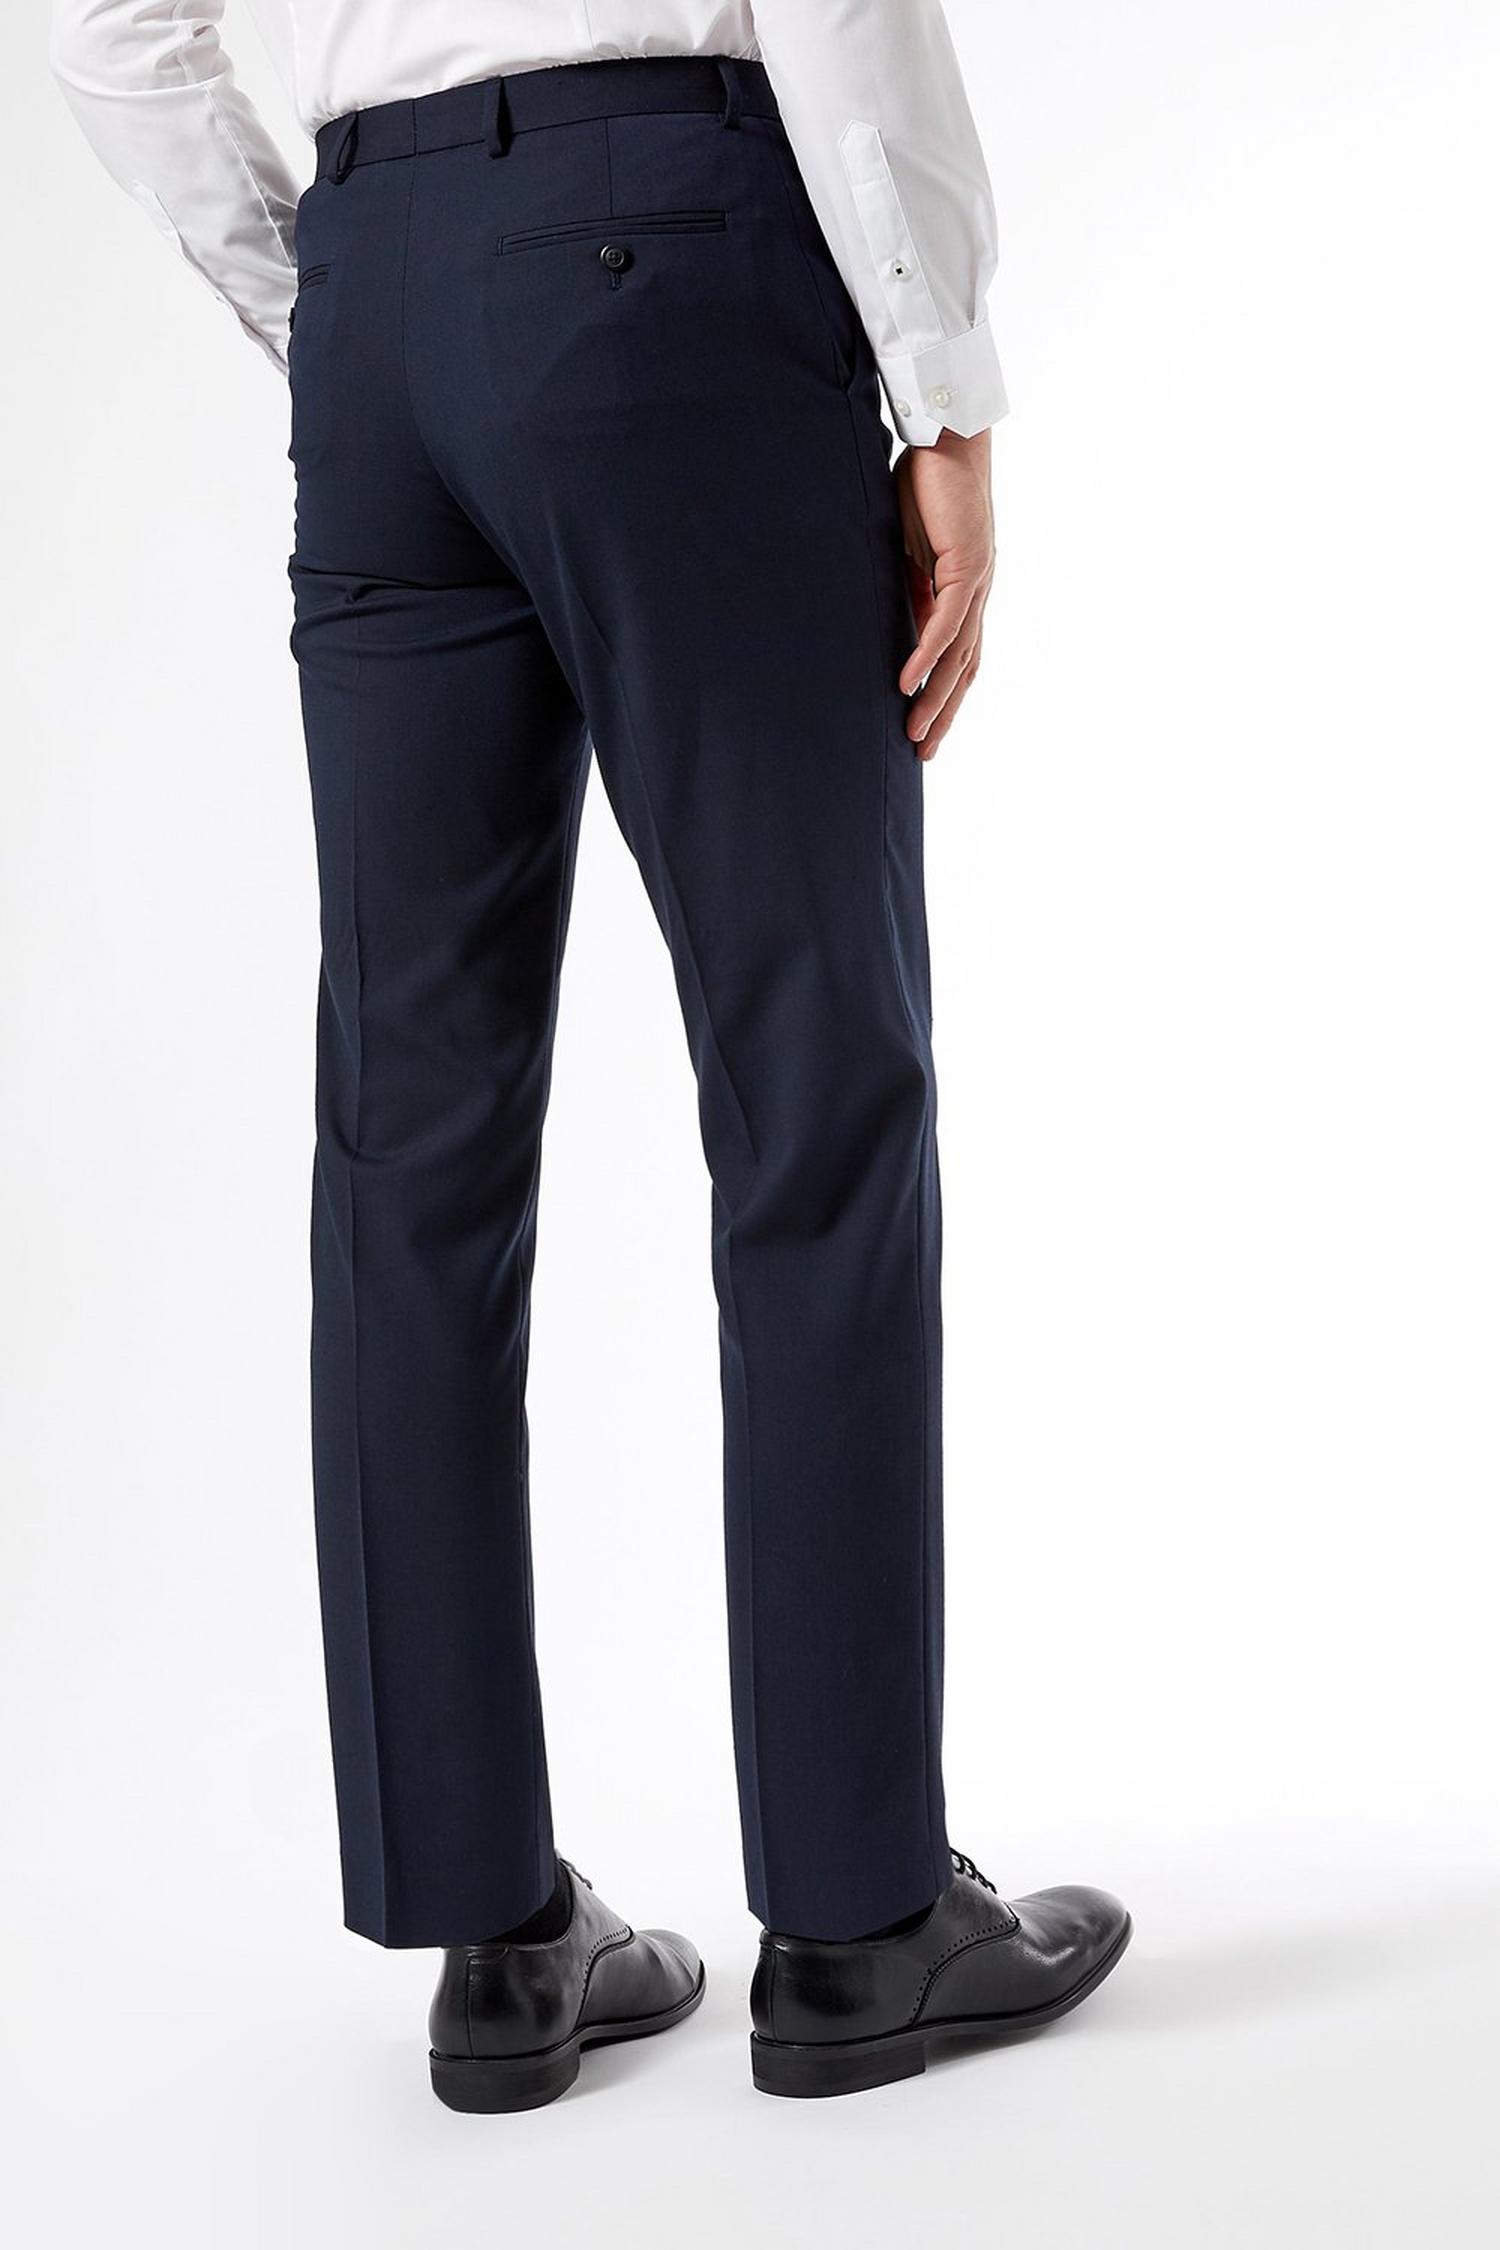 Tailored Fit Stretch Navy Trousers | Burton UK